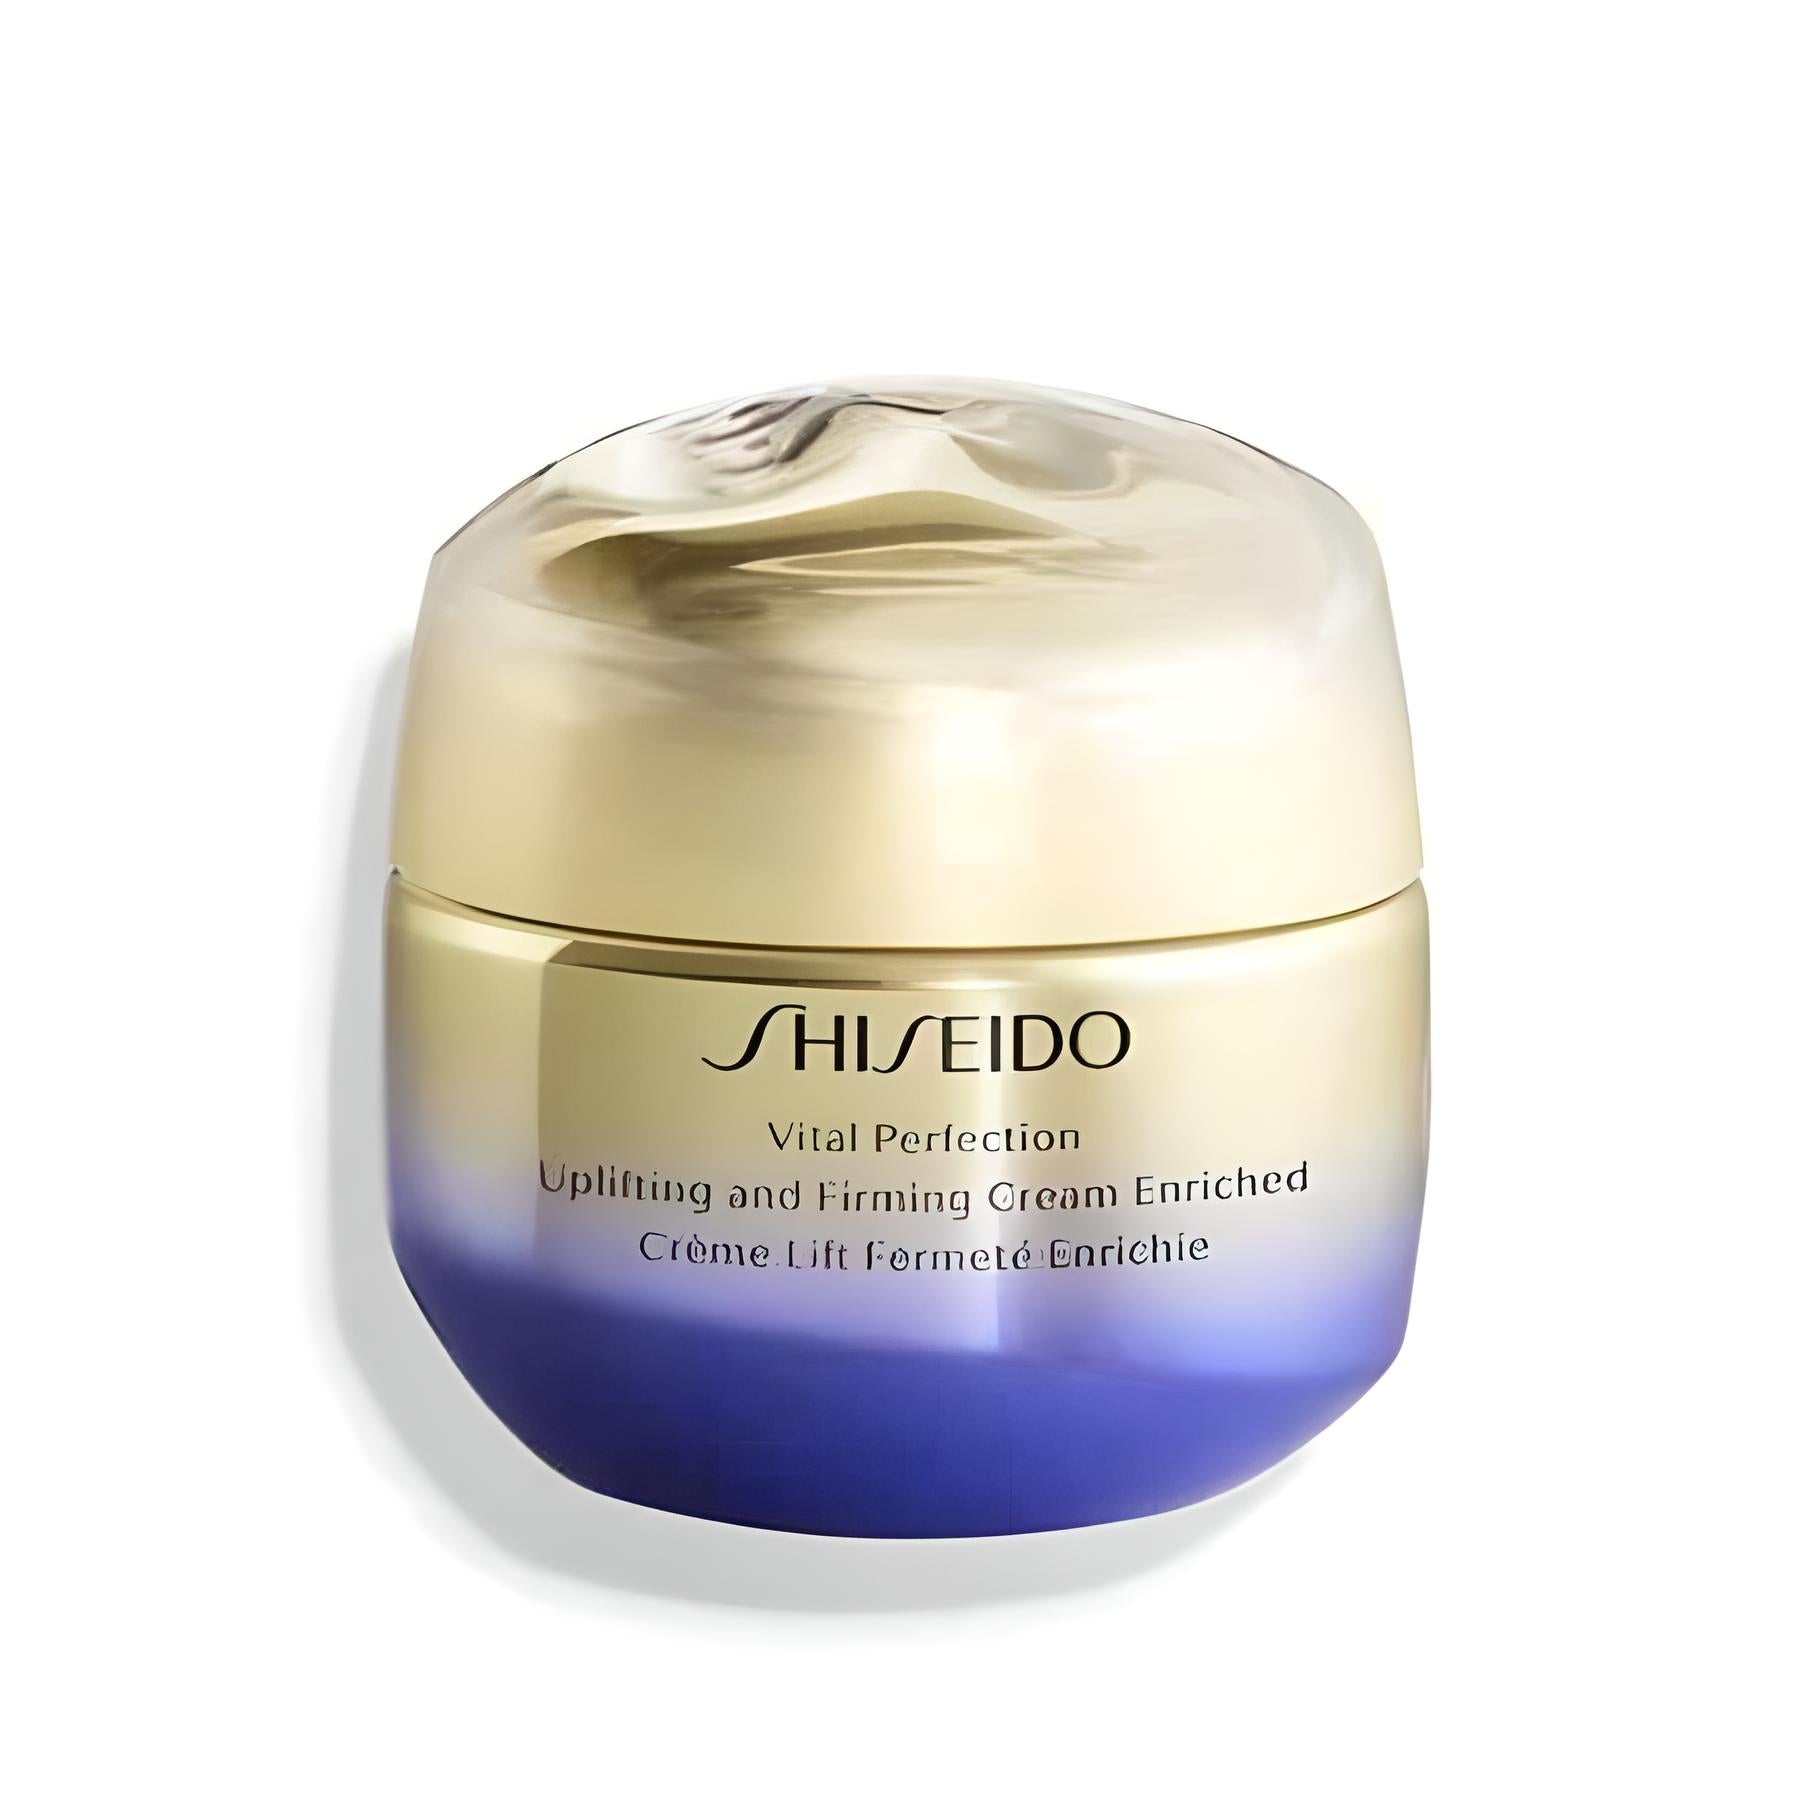 VITAL PERFECTION uplifting & firming cream enriched Gesichtspflege SHISEIDO   